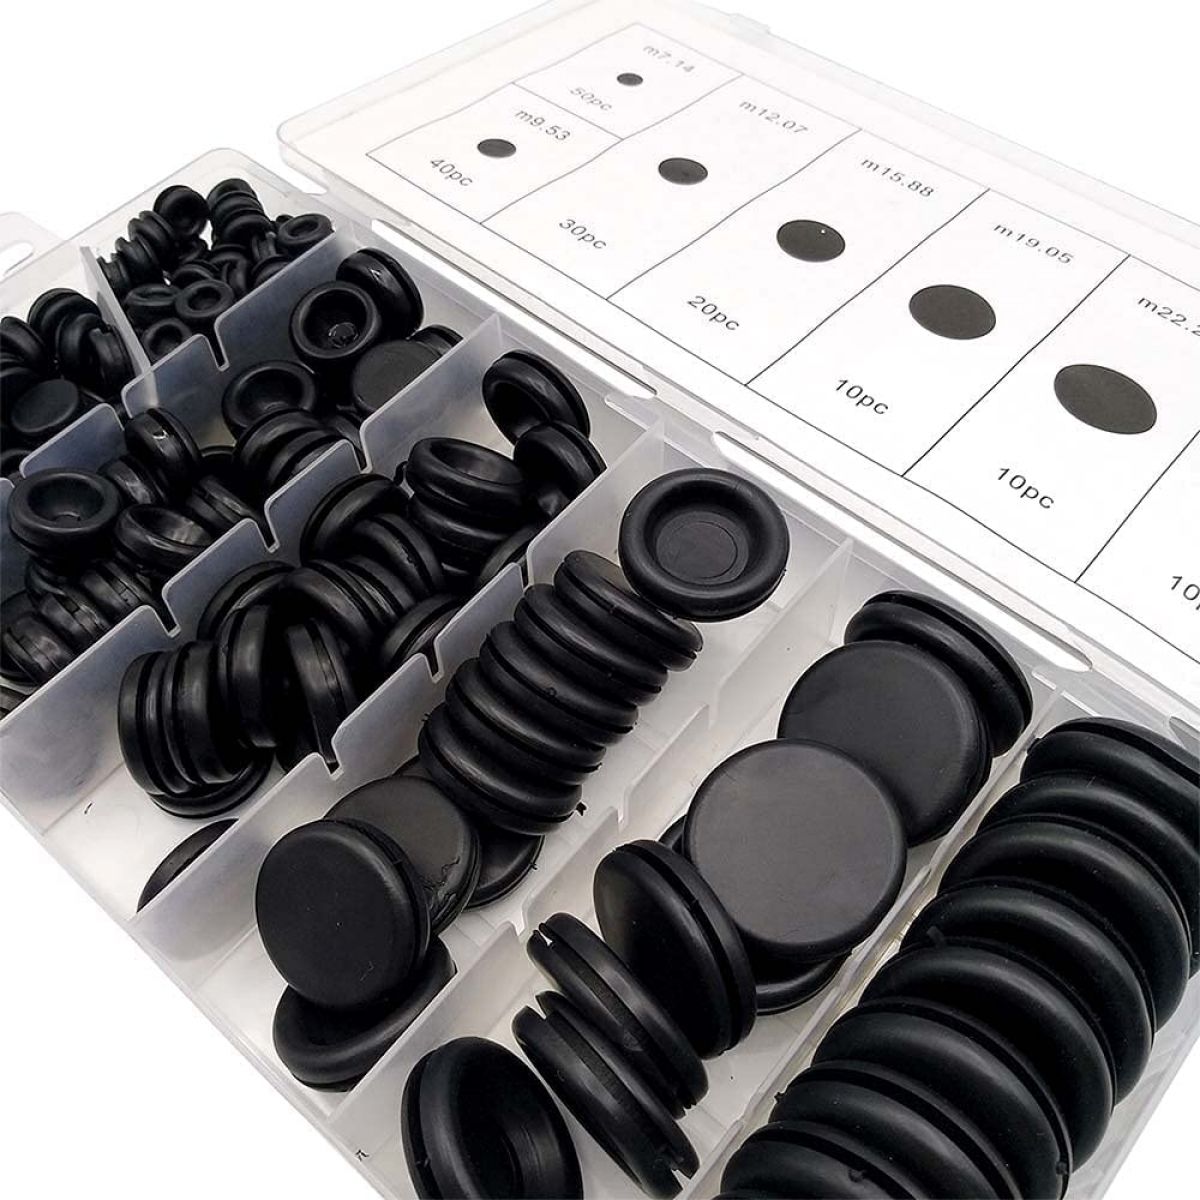 A set of rubber gaskets in 7 sizes.